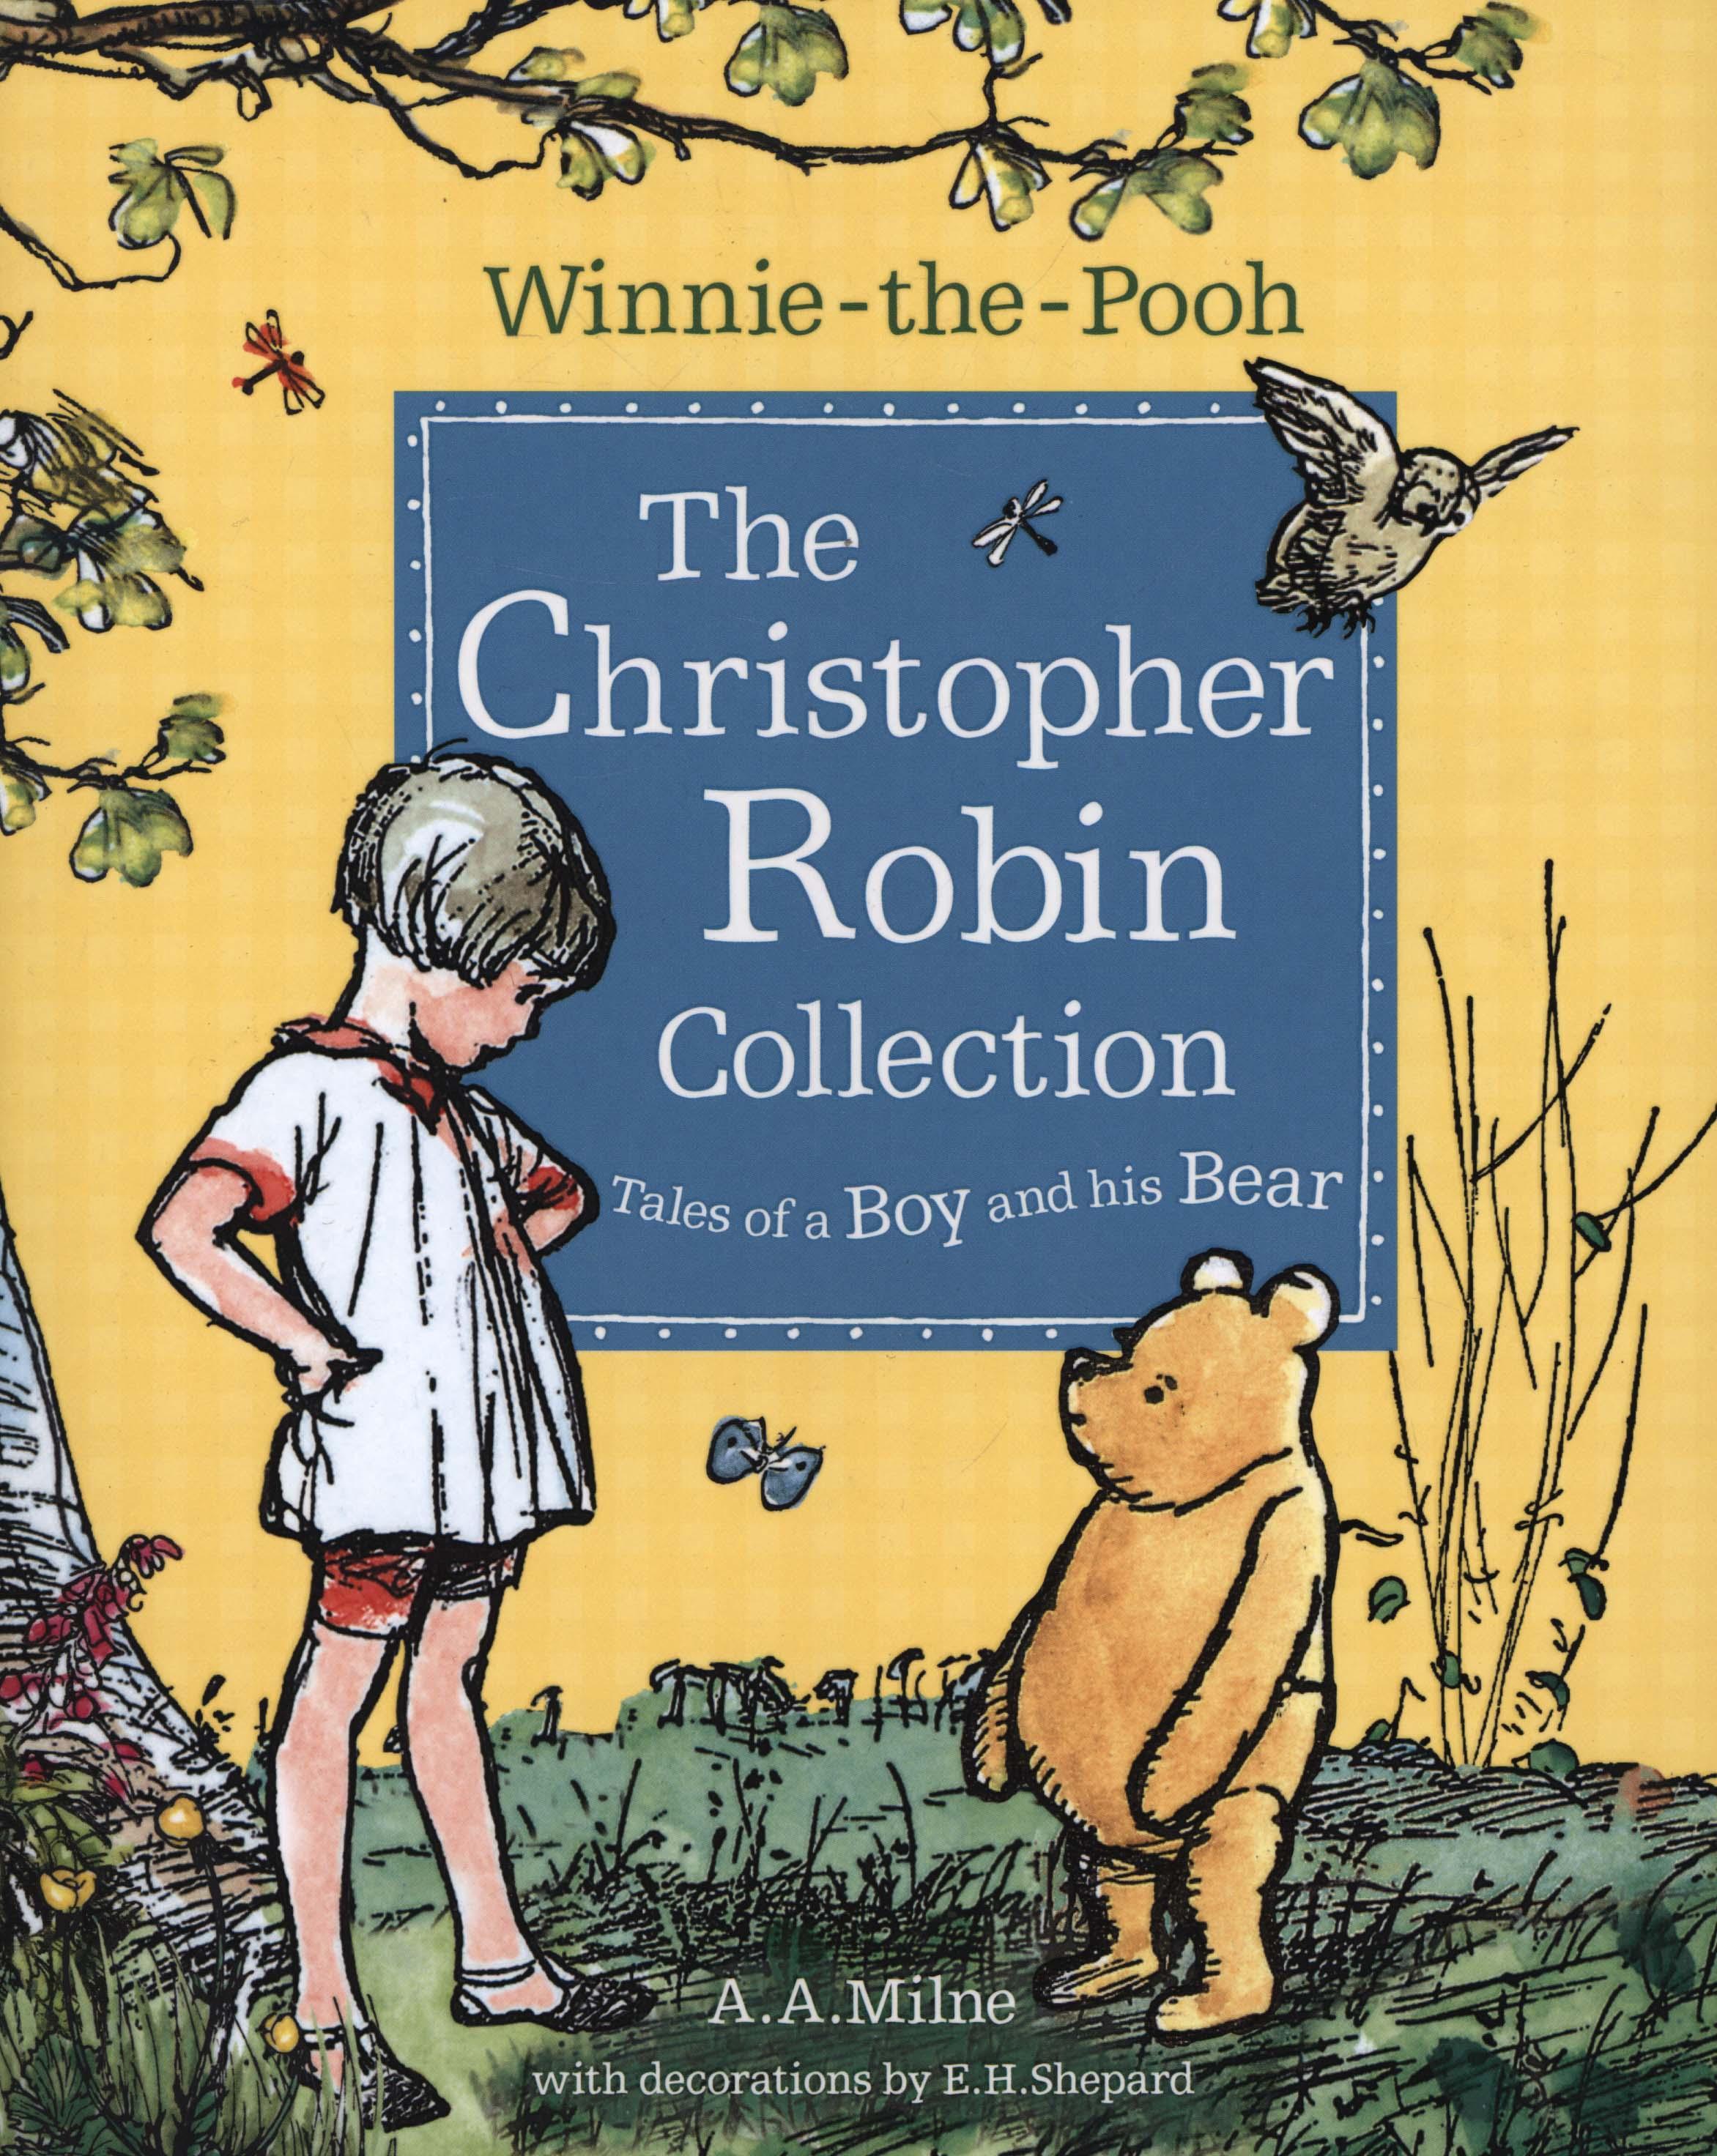 Winnie-the-Pooh: The Christopher Robin Collection (Tales of